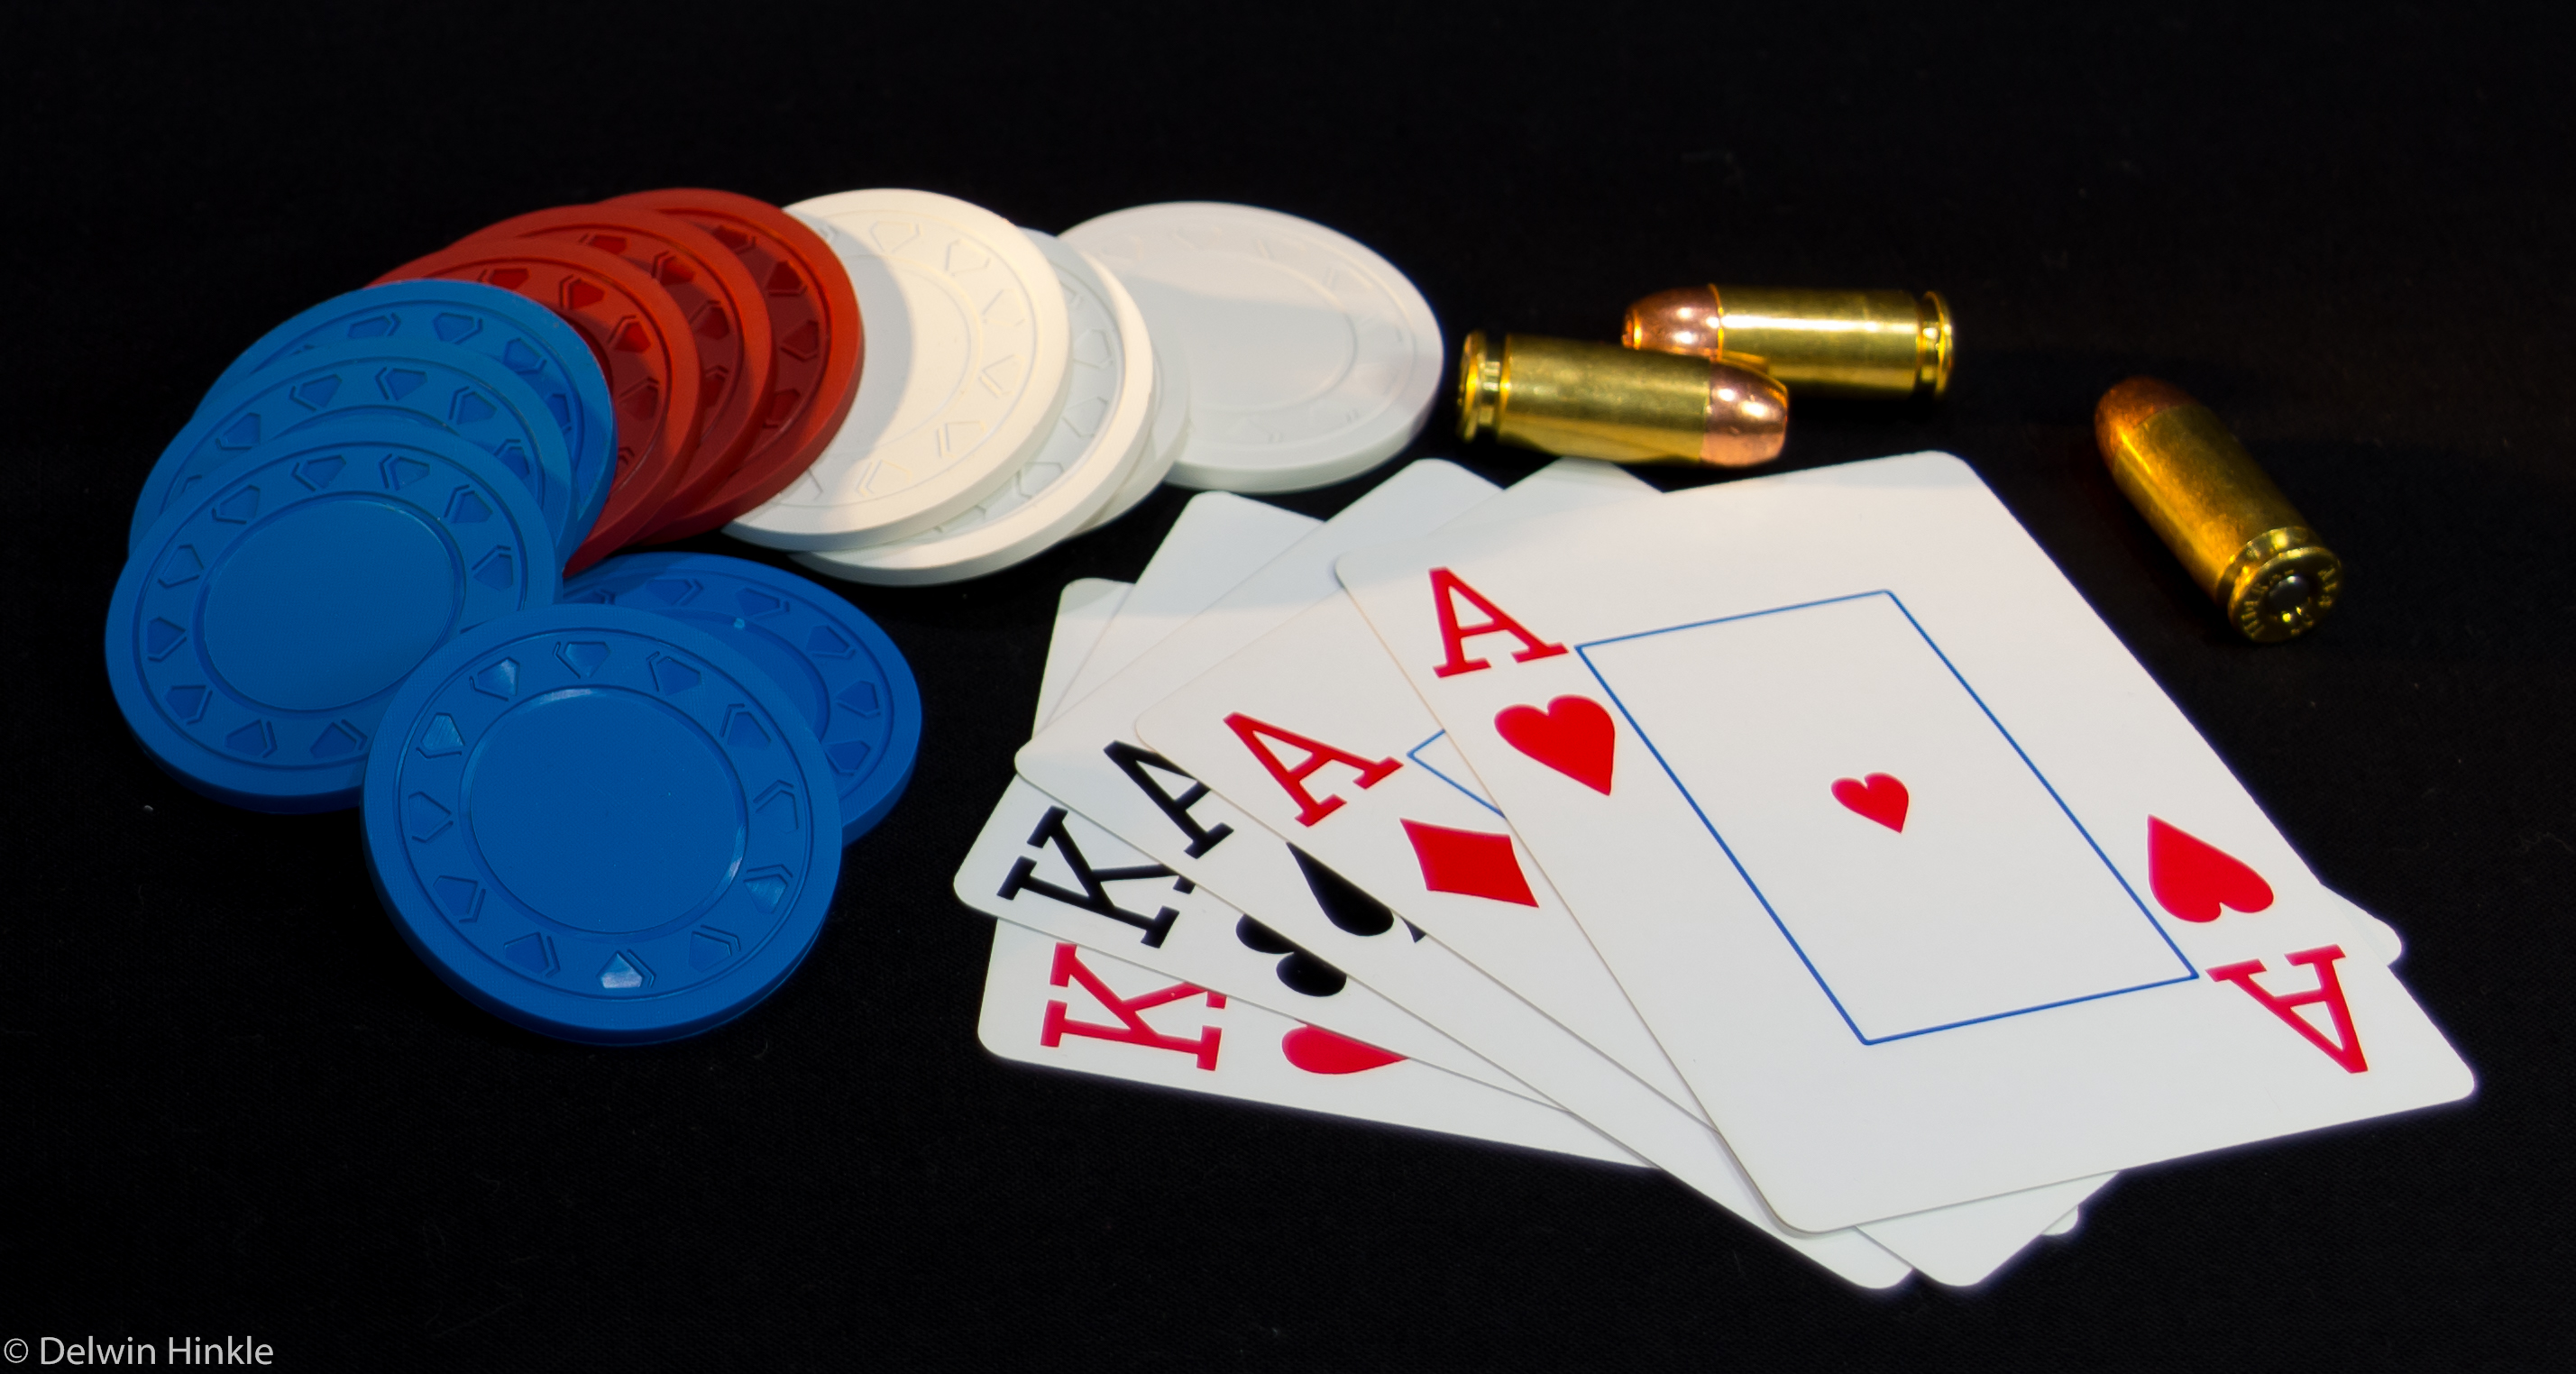 Personal defense is very similar to a poker game. You can win with luck alone, but having a plan and being prepared increase your odds significantly. Photo: author 